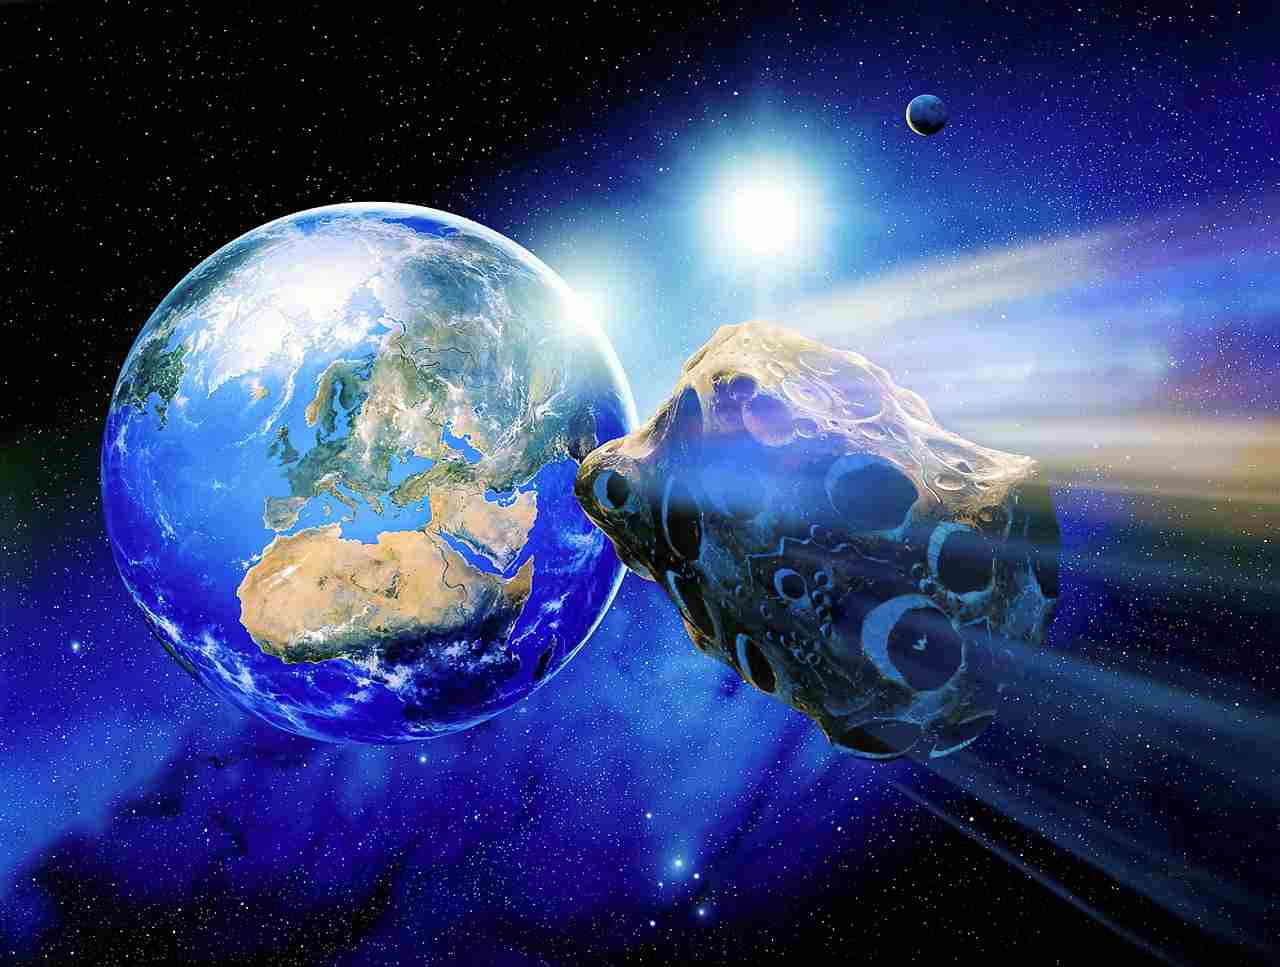 How big is the asteroid that's coming in 2022?